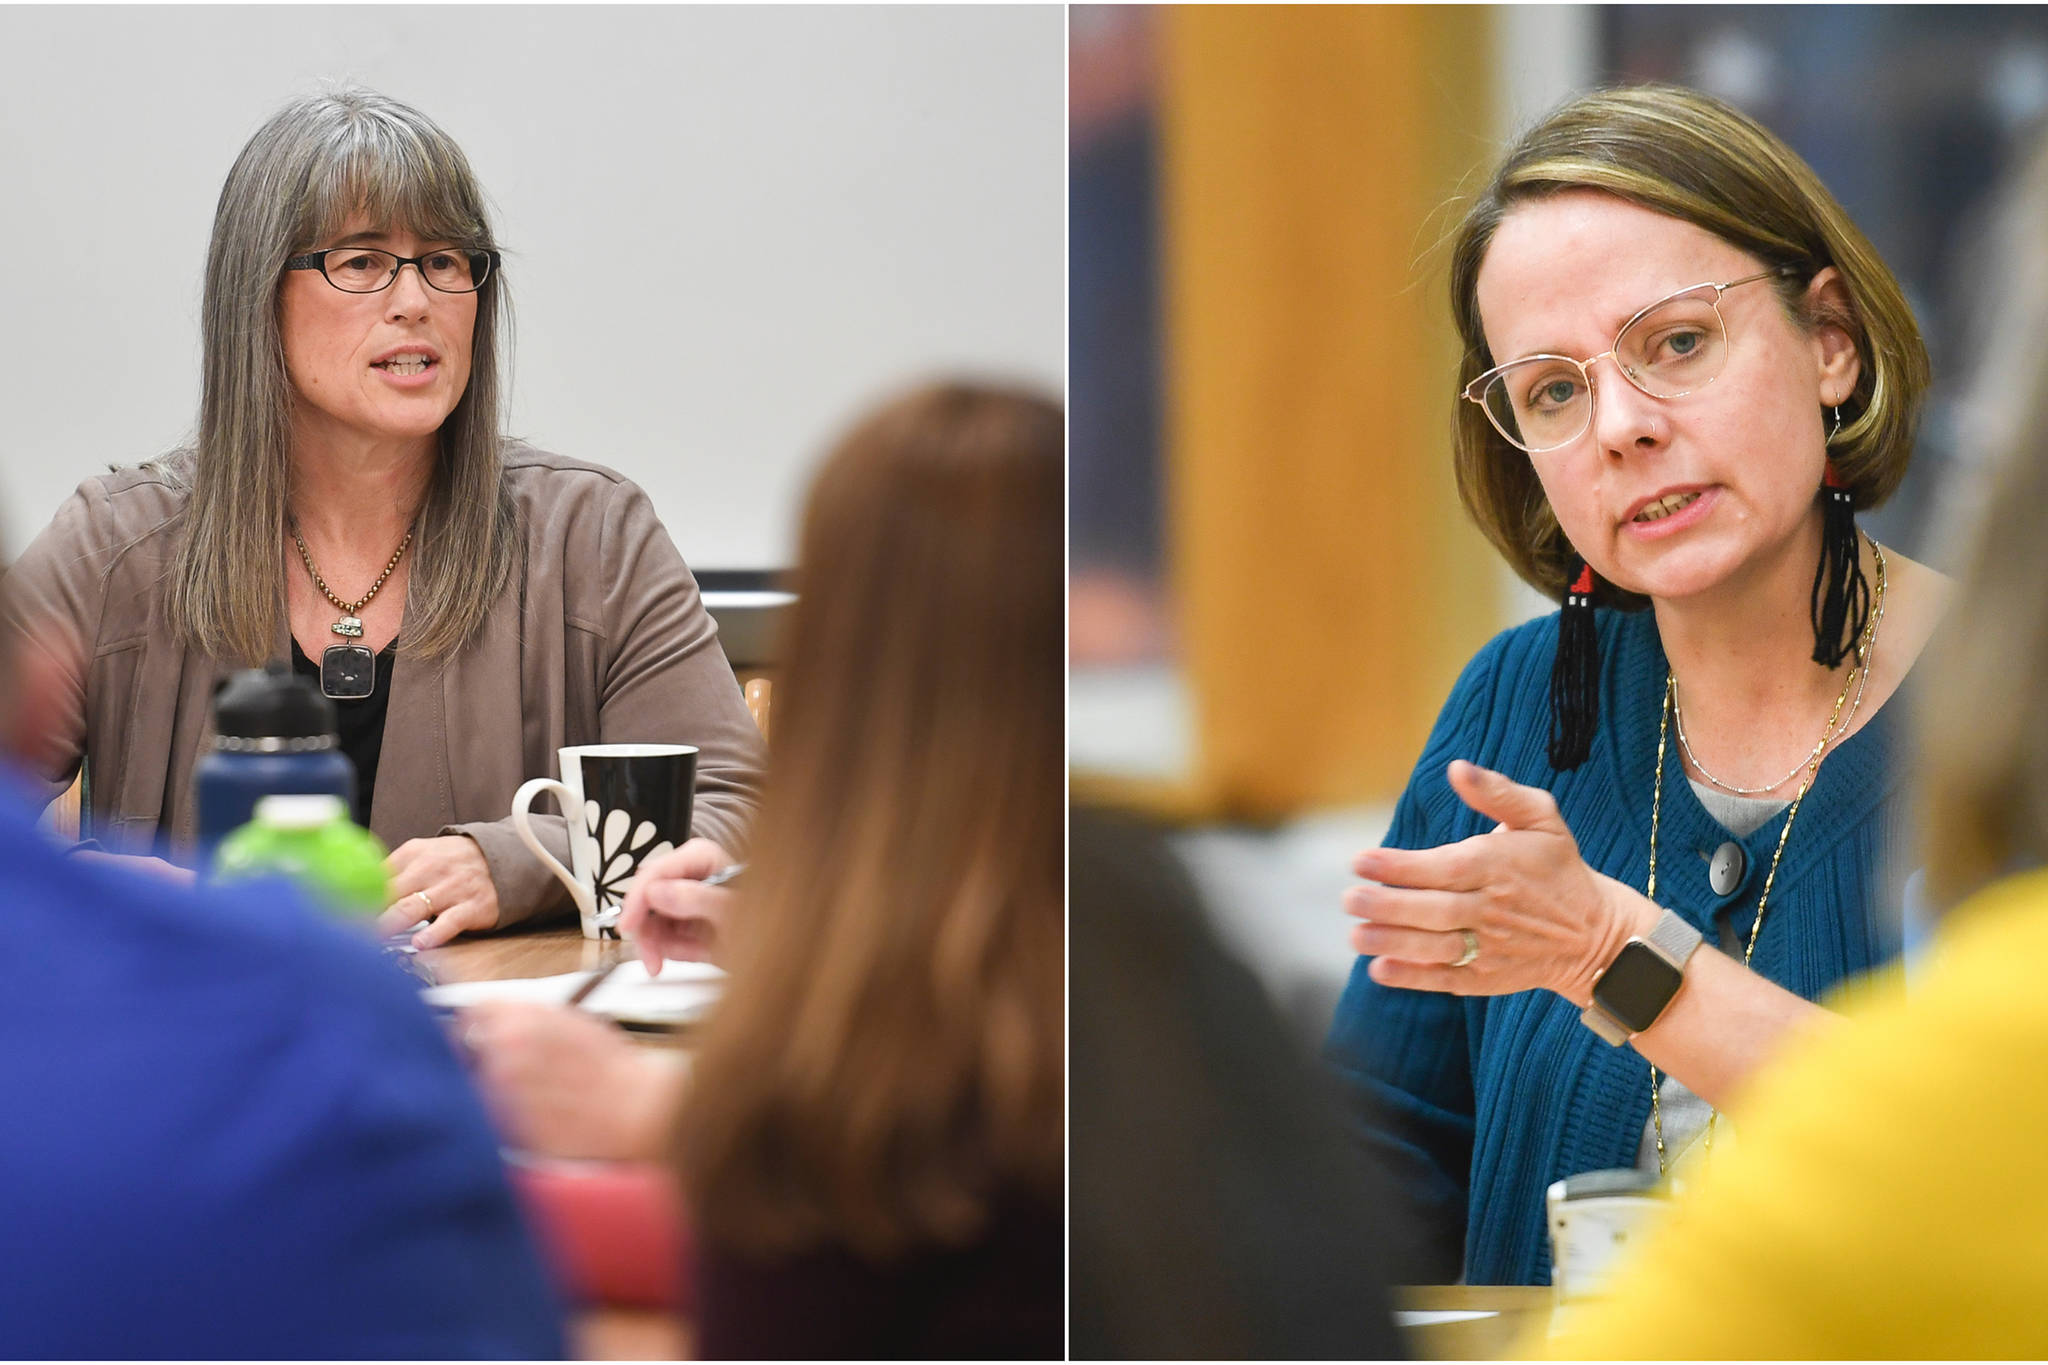 Molly Box is the new permanent principal of Harborview Elementary School, and Elizabeth Pisel-Davis is the new permanent principal of Riverbend Elementary School. Both previously served as interim principal at their respective schools. (Michael Penn | Juneau Empire)